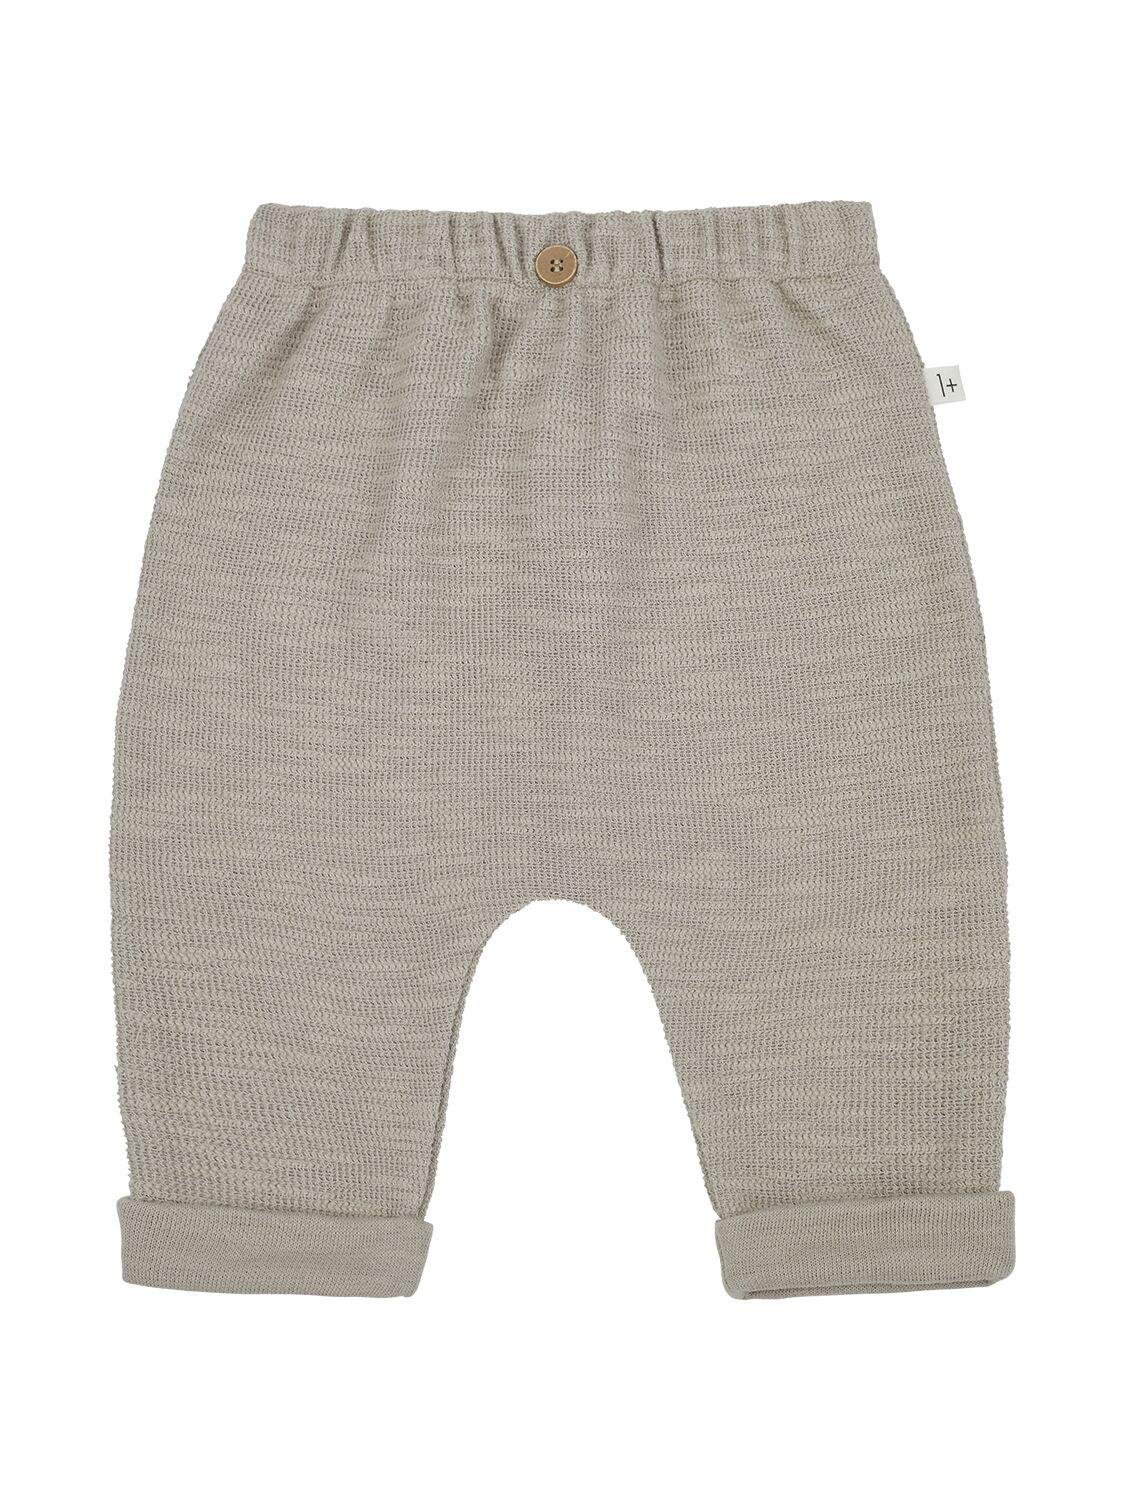 Cotton Blend Sweatpants by 1 + IN THE FAMILY